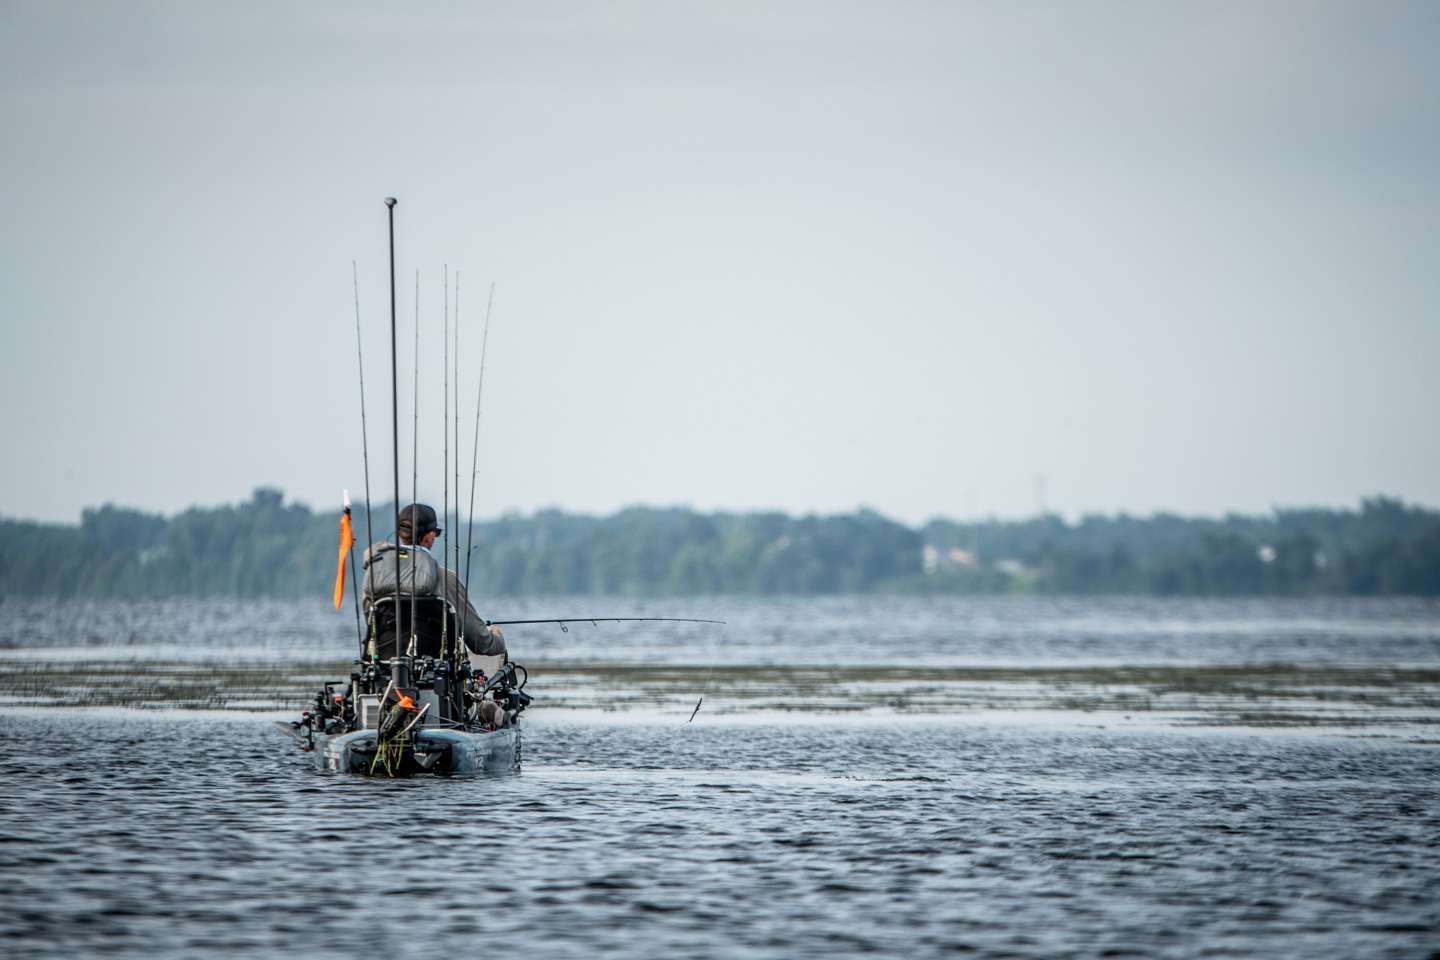 While Maryland's Chesapeake Bay has not hosted an Open event recently, the 2015 Elite event provided plenty of fireworks. The four-day tournament concluded with a winning weight of 70-2 and plenty of memorable moments.